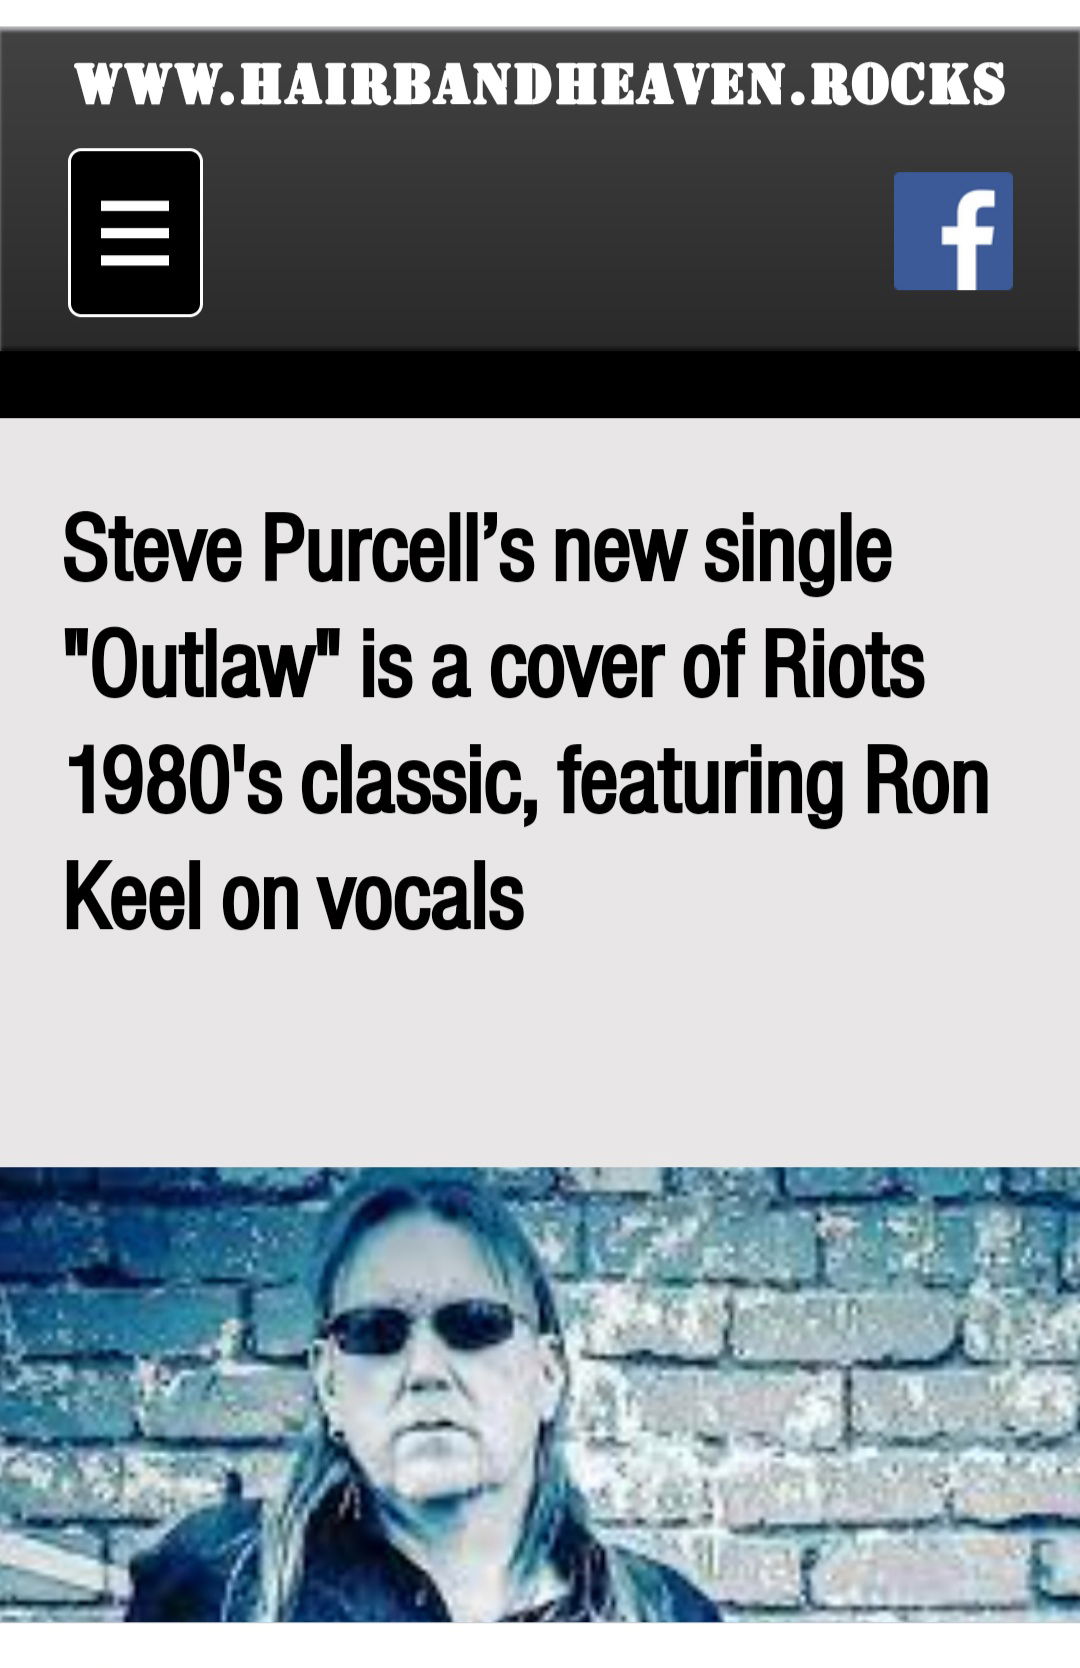 Hair Band Heaven Magazine Features "Outlaw"